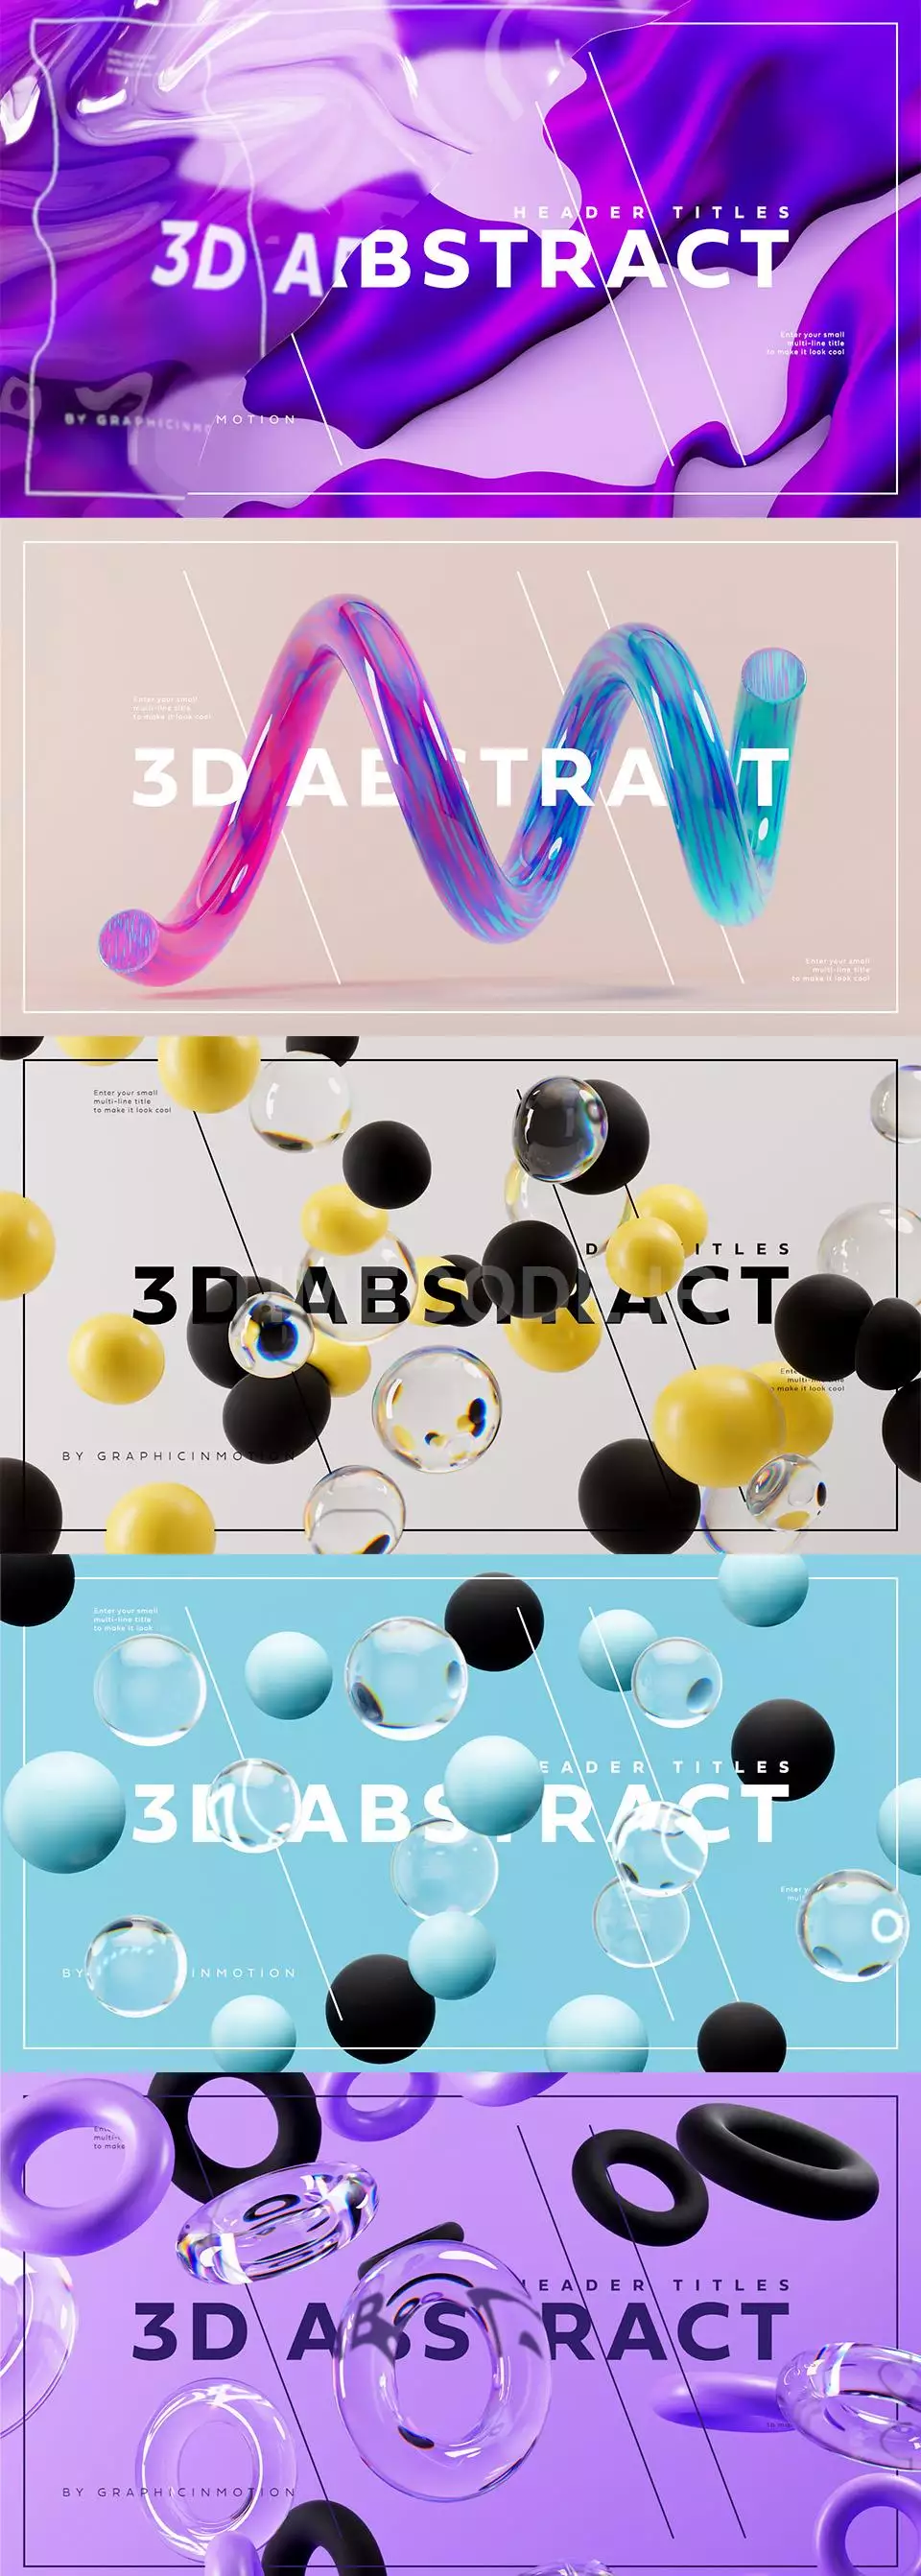 Abstract 3D Titles Pack